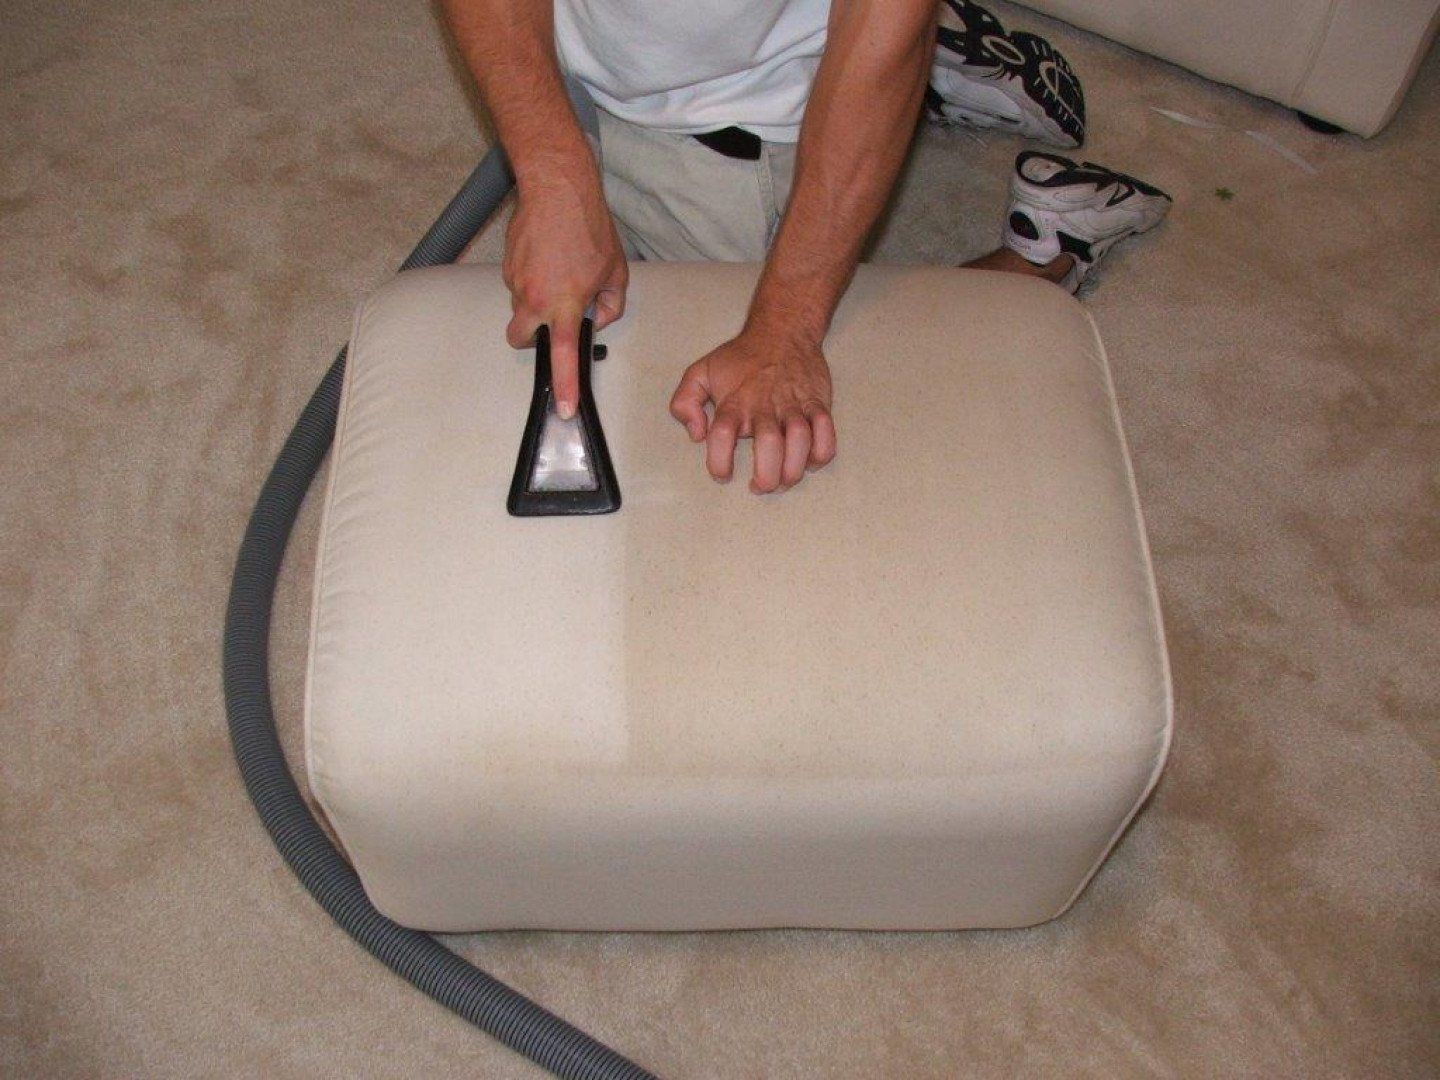 Upholstery cleaning in a sofa